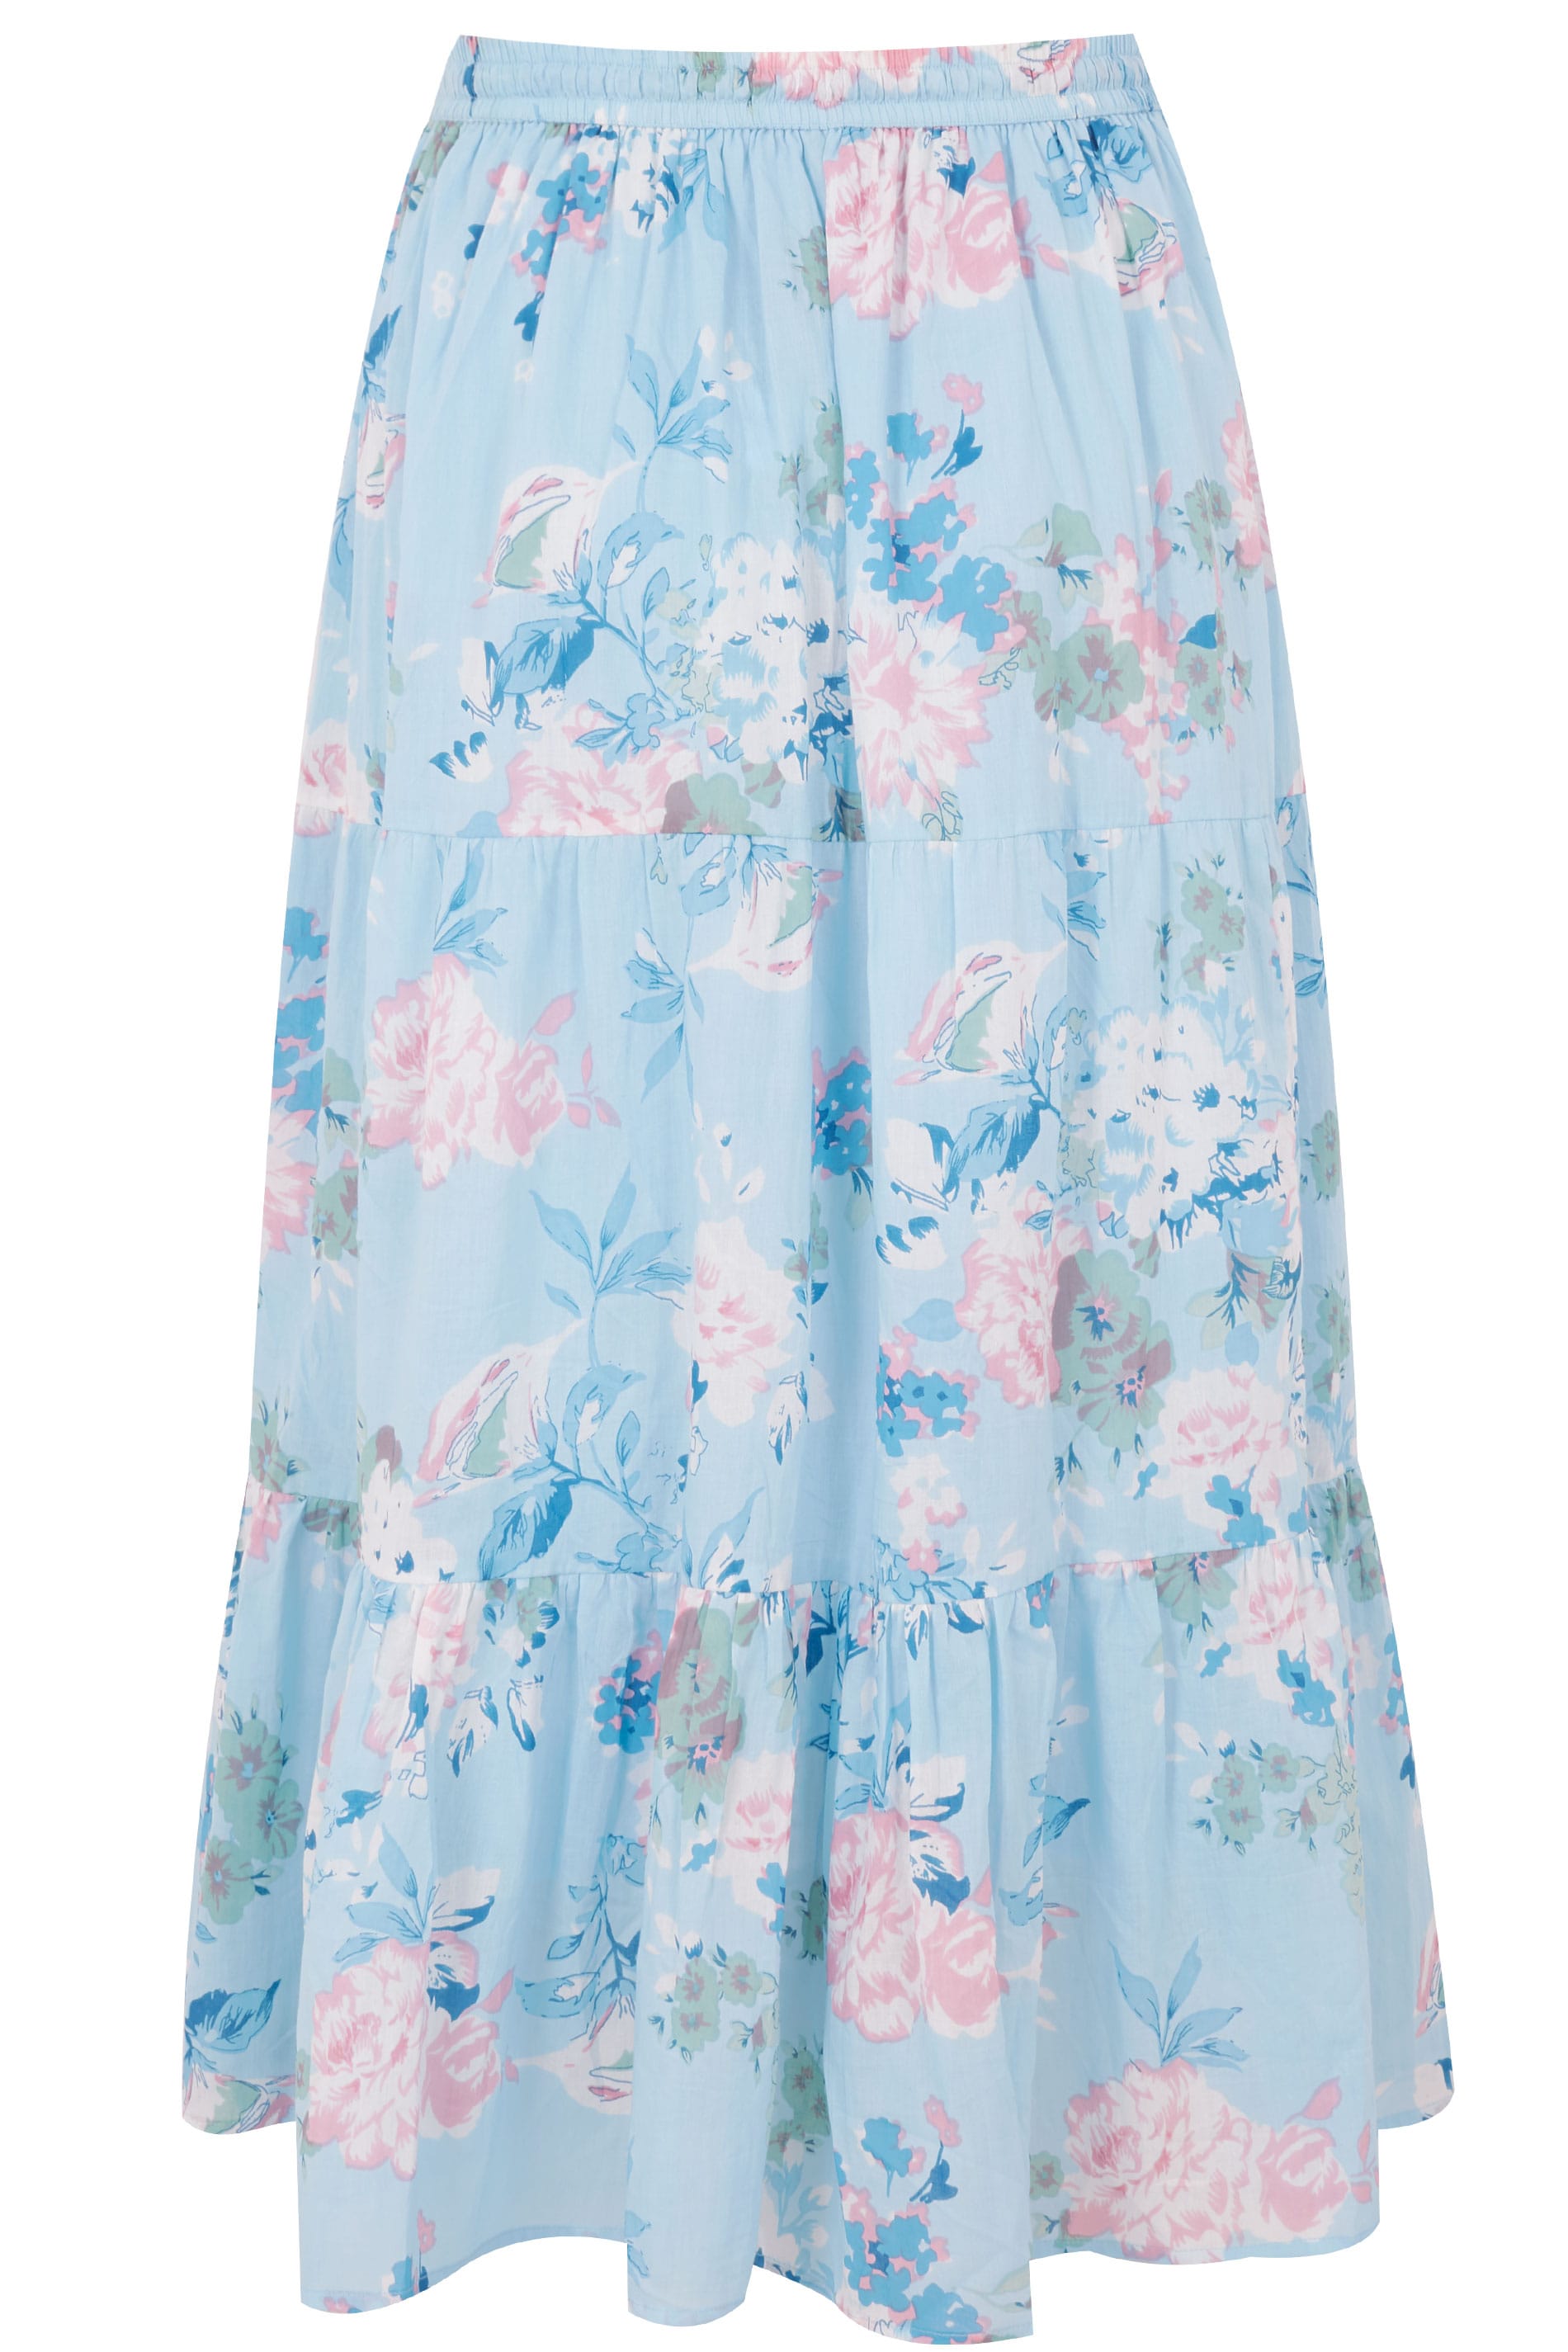 Pastel Blue & Multi Floral Print Tiered Maxi Skirt, Plus size 16 to 36